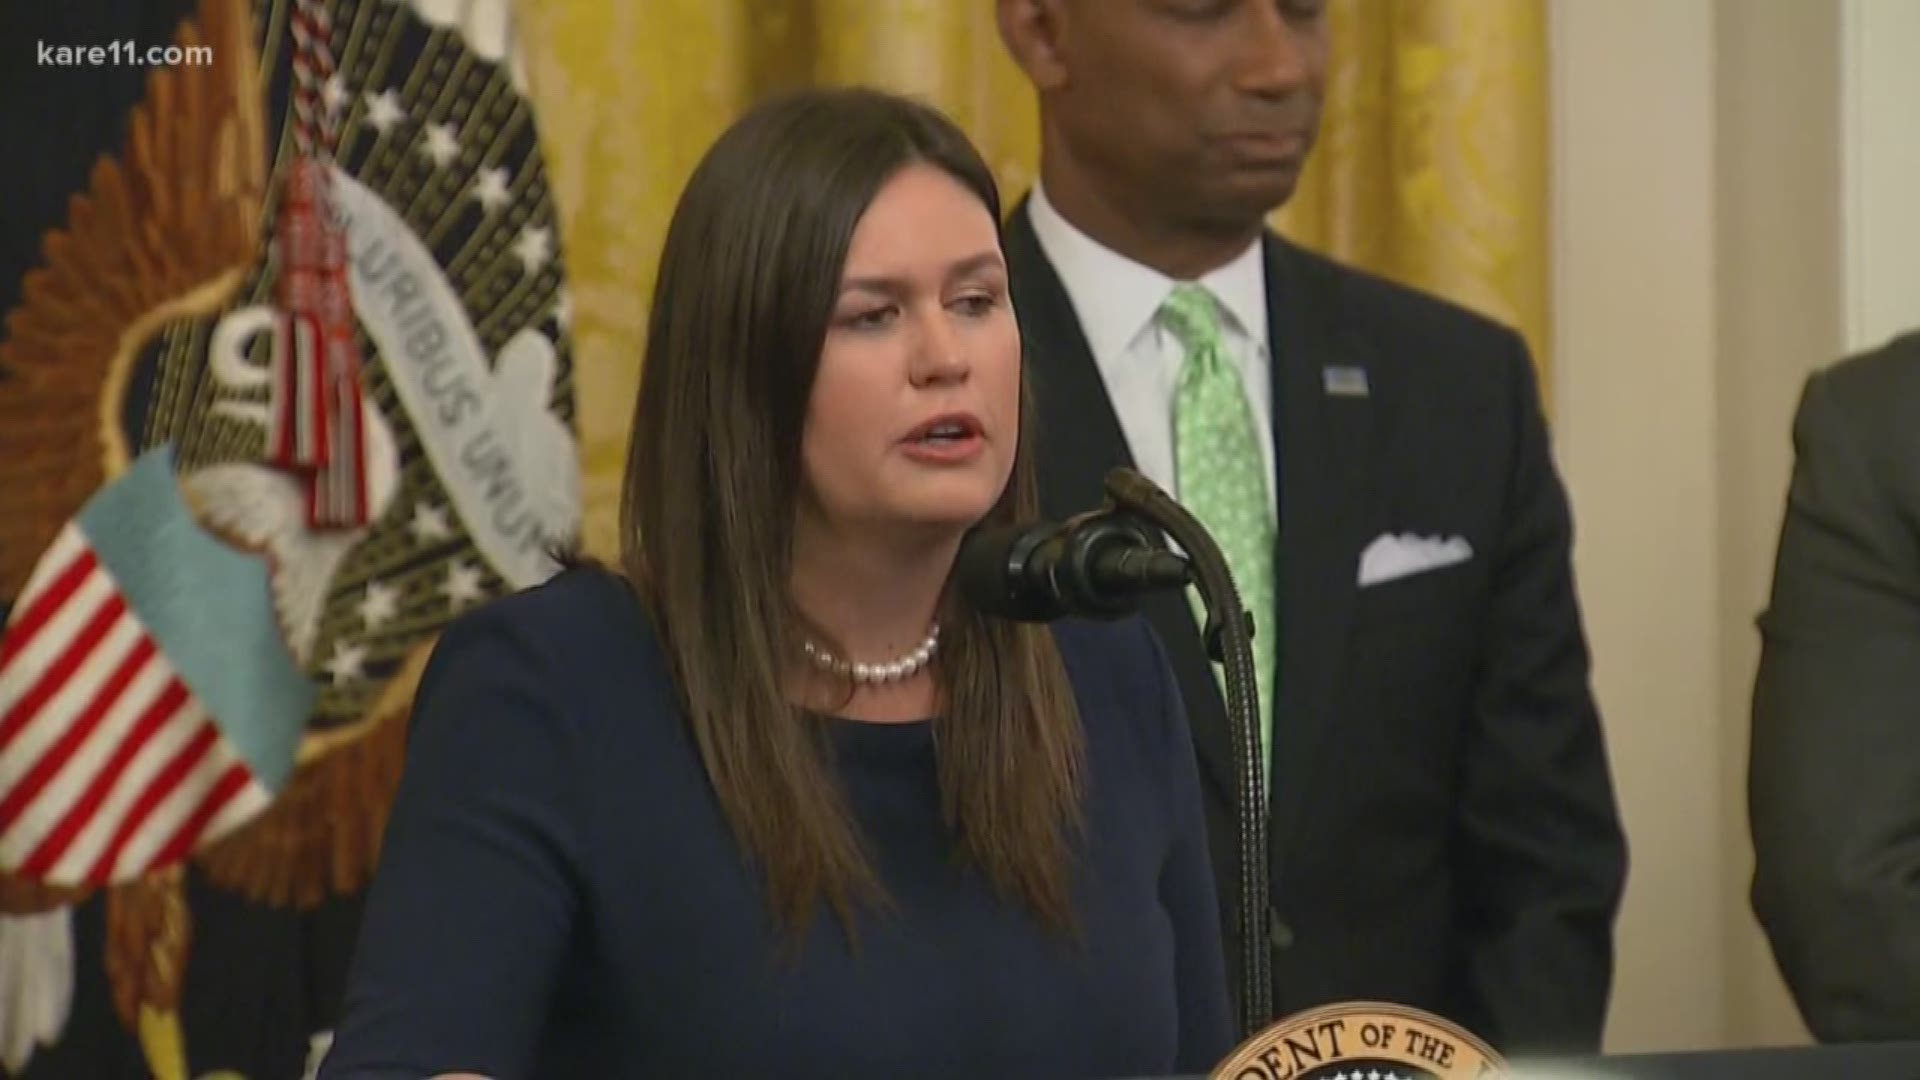 On Thursday, President Trump announced Sarah Huckabee Sanders would be leaving her position as Press Secretary to return home to Arkansas. https://kare11.tv/31Ad2ZZ